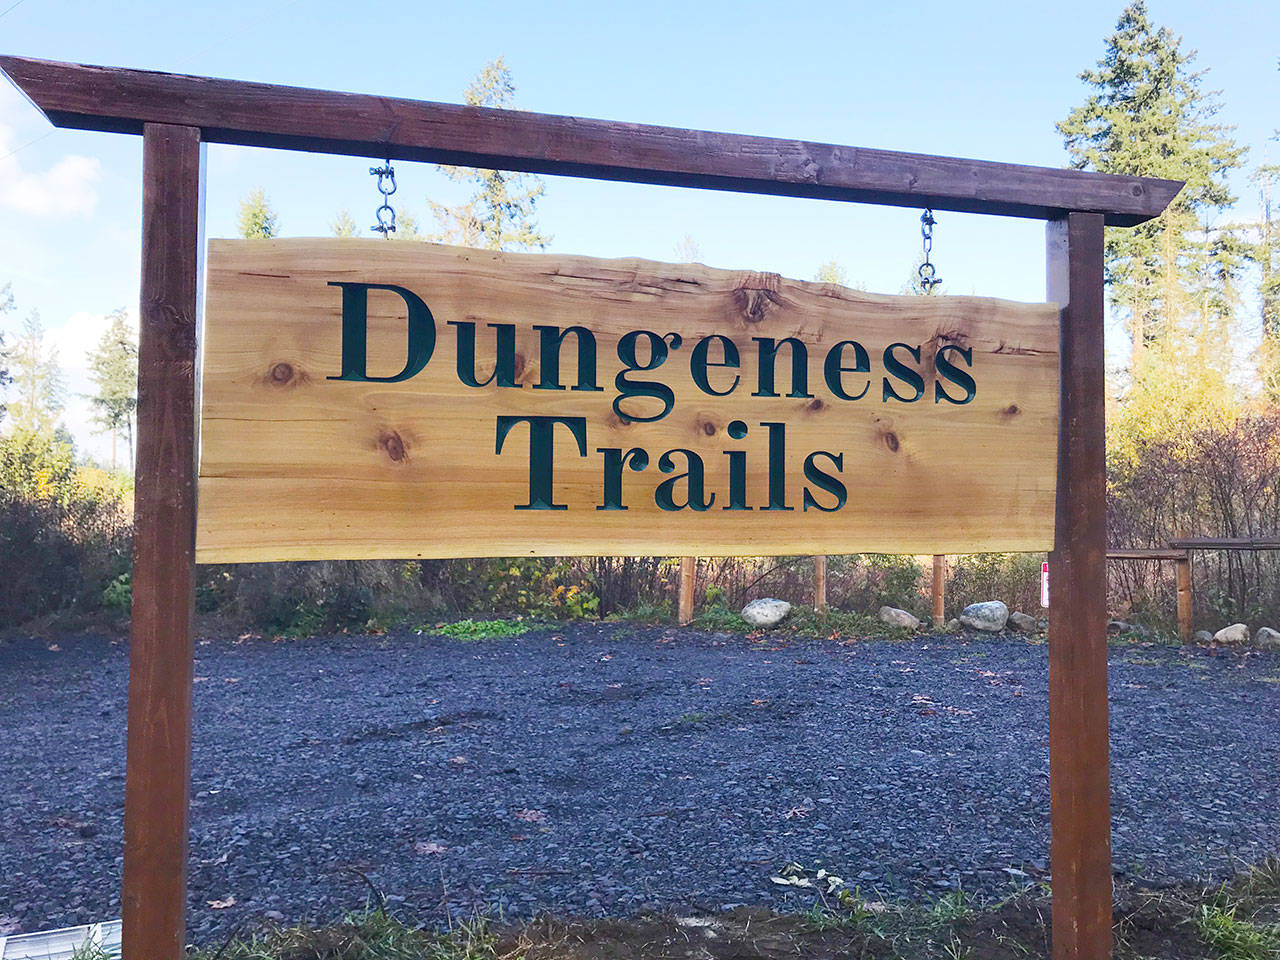 The trailhead sign and parking lot is up at Dungeness Trails, a trail system now open to the communit. Submitted photo